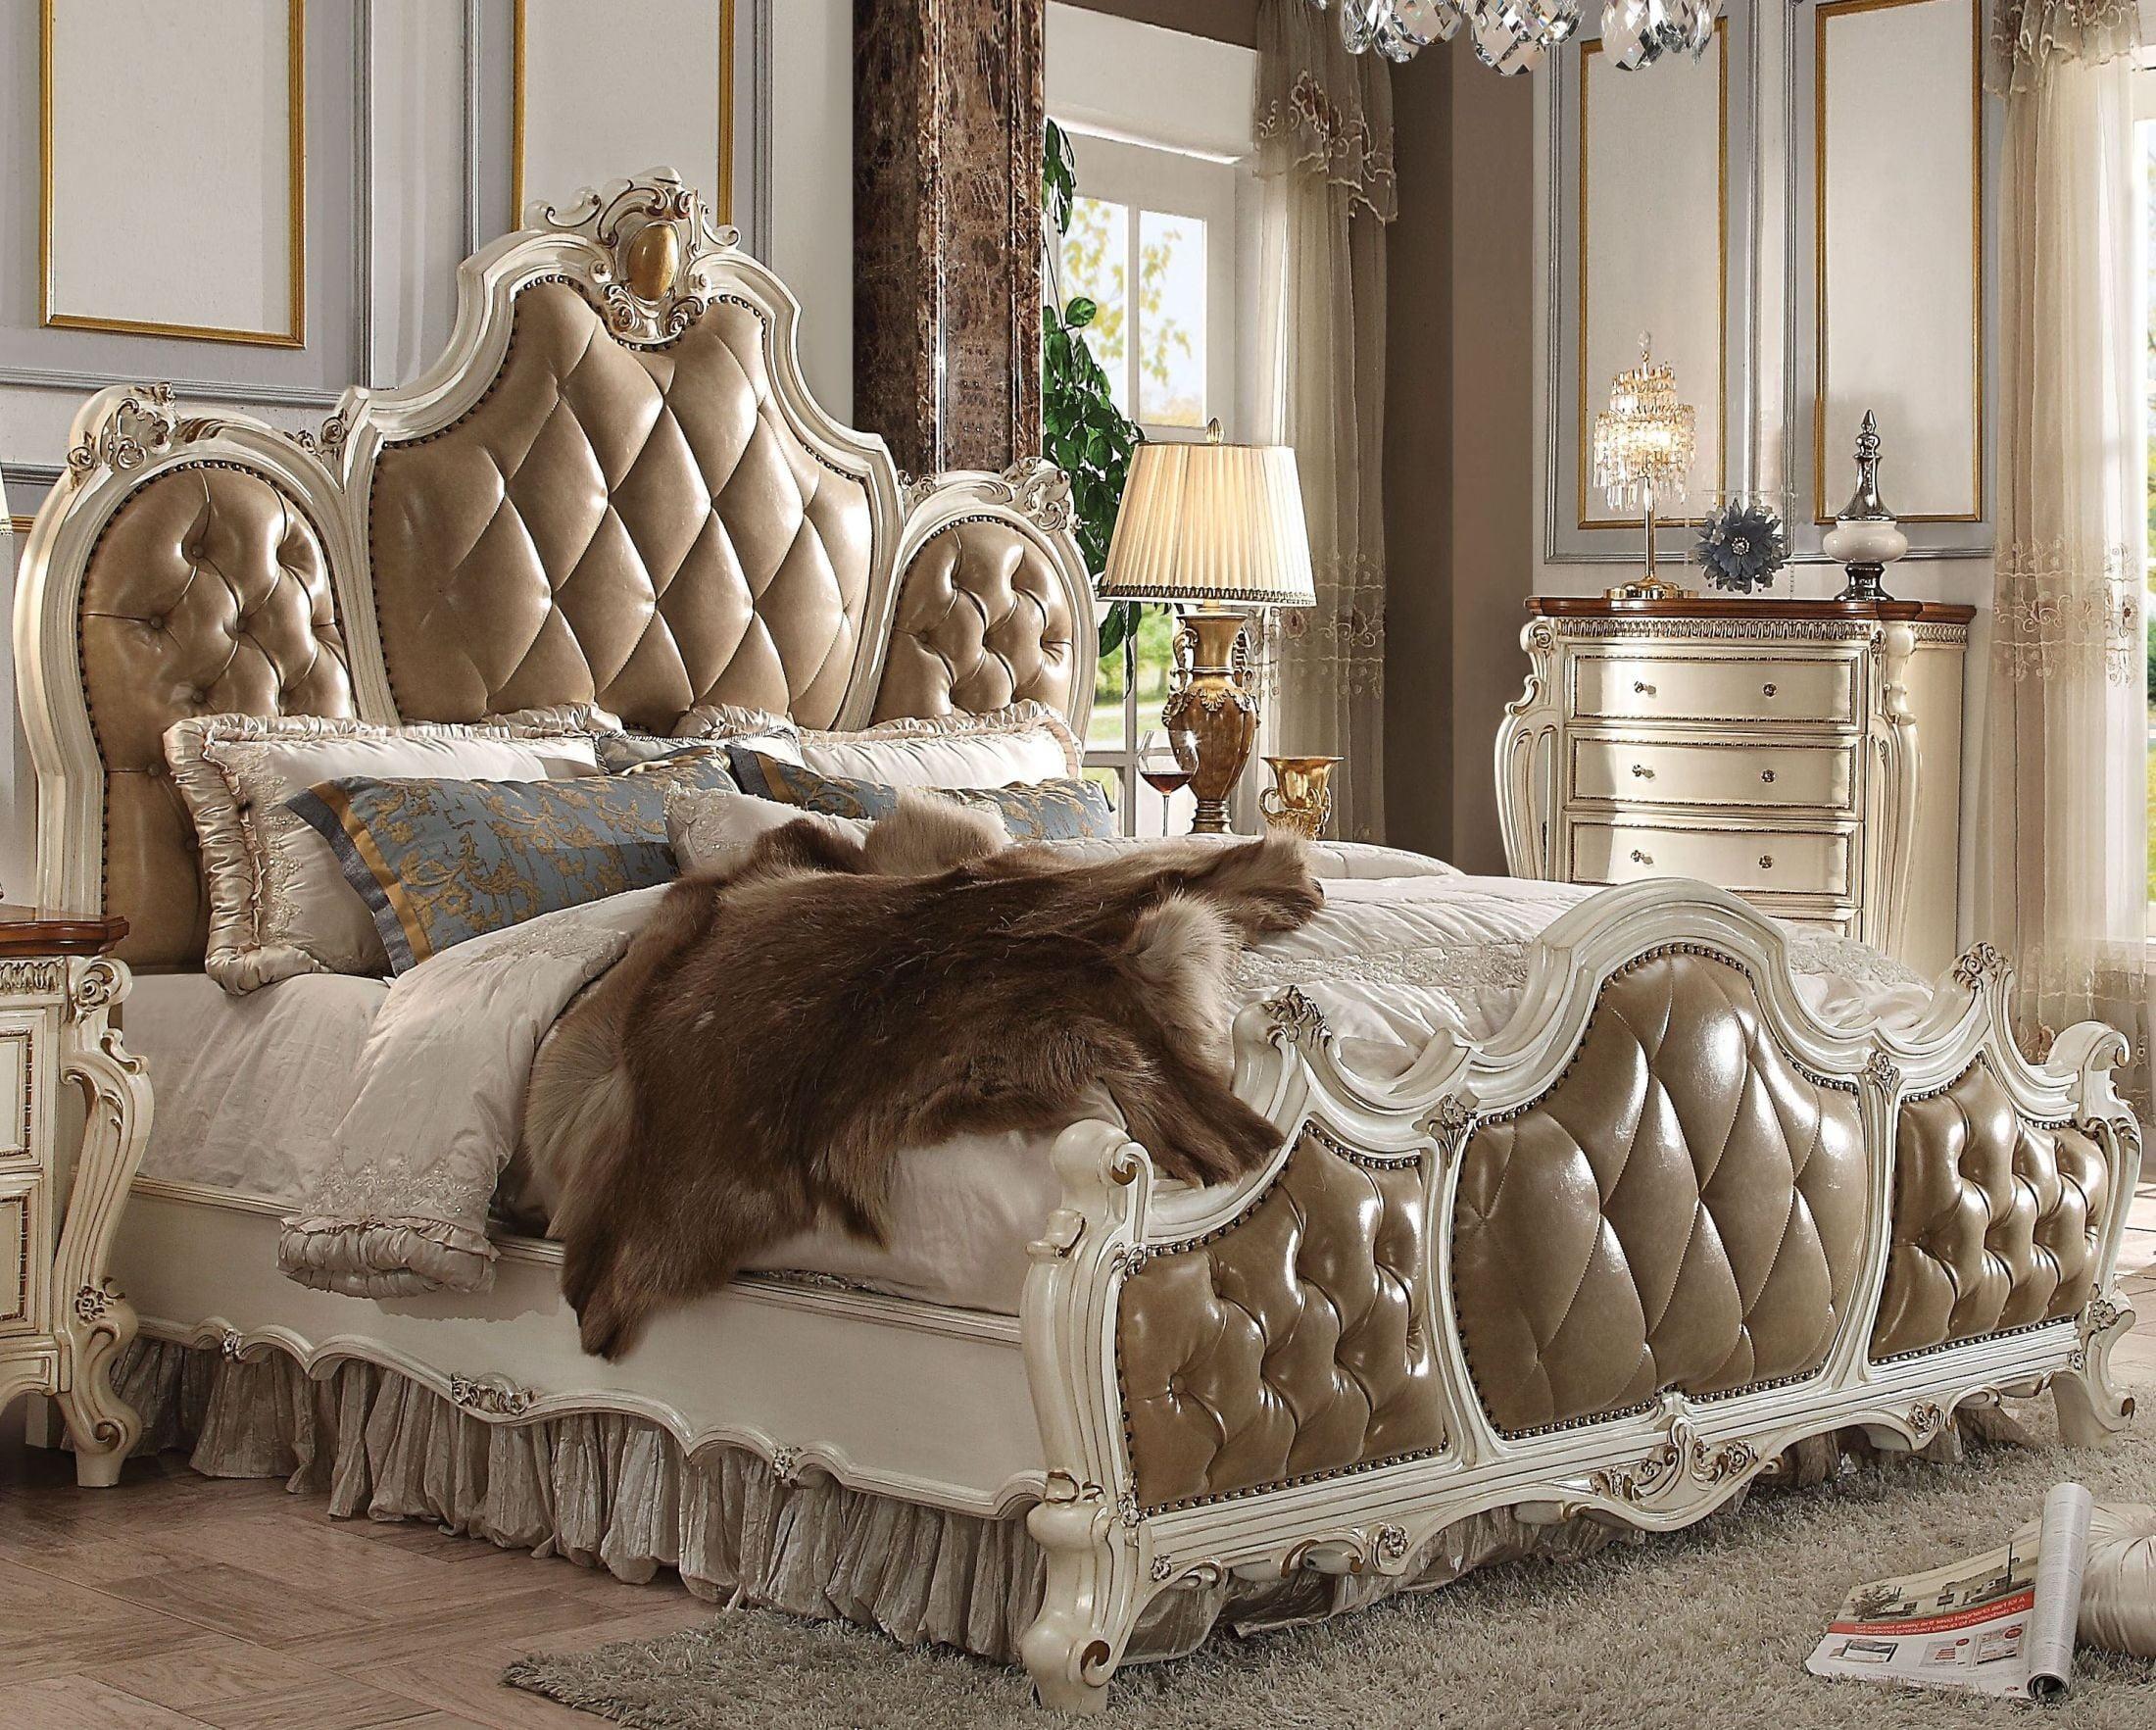 

    
Picardy-26900Q-Set-6 Antique Pearl & Brown Tufted Queen Bedroom Set 6P Picardy 26900Q Acme Classic
